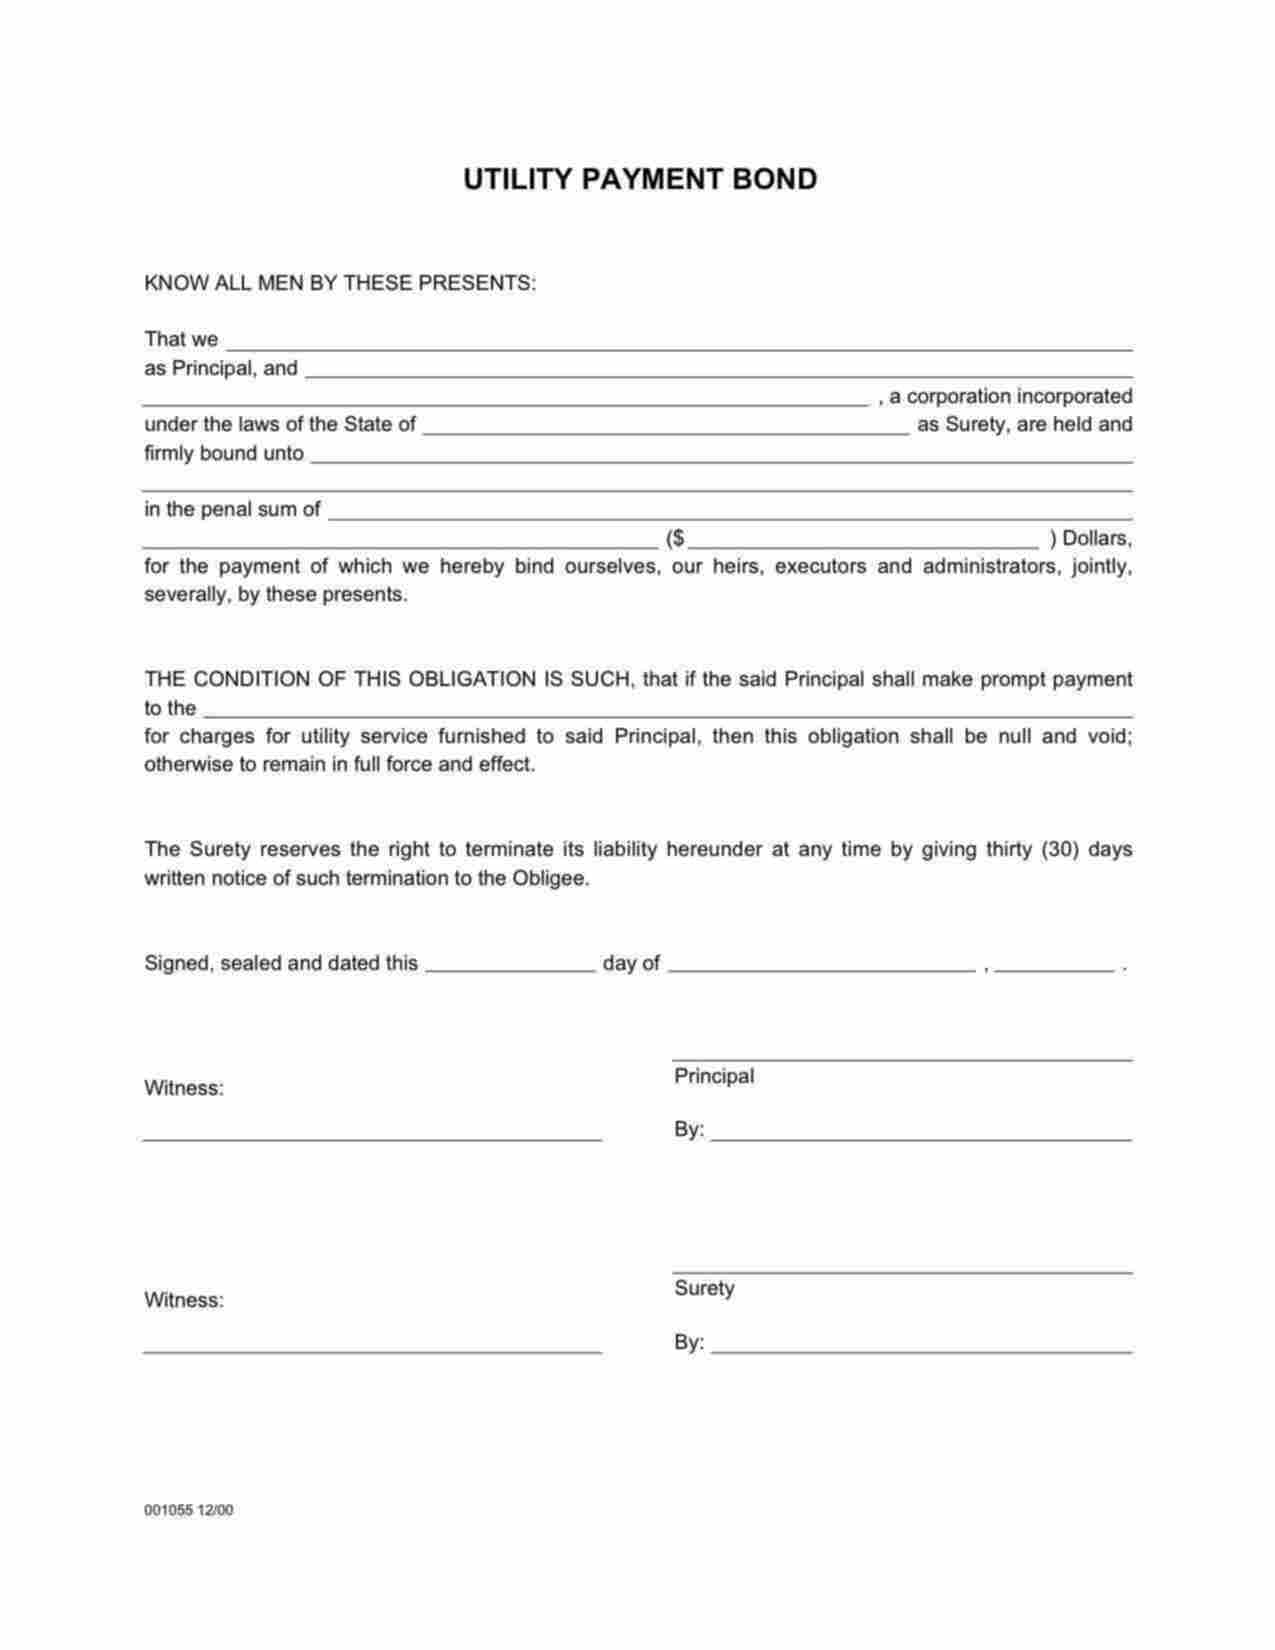 District of Columbia Wage and Welfare Bond Form